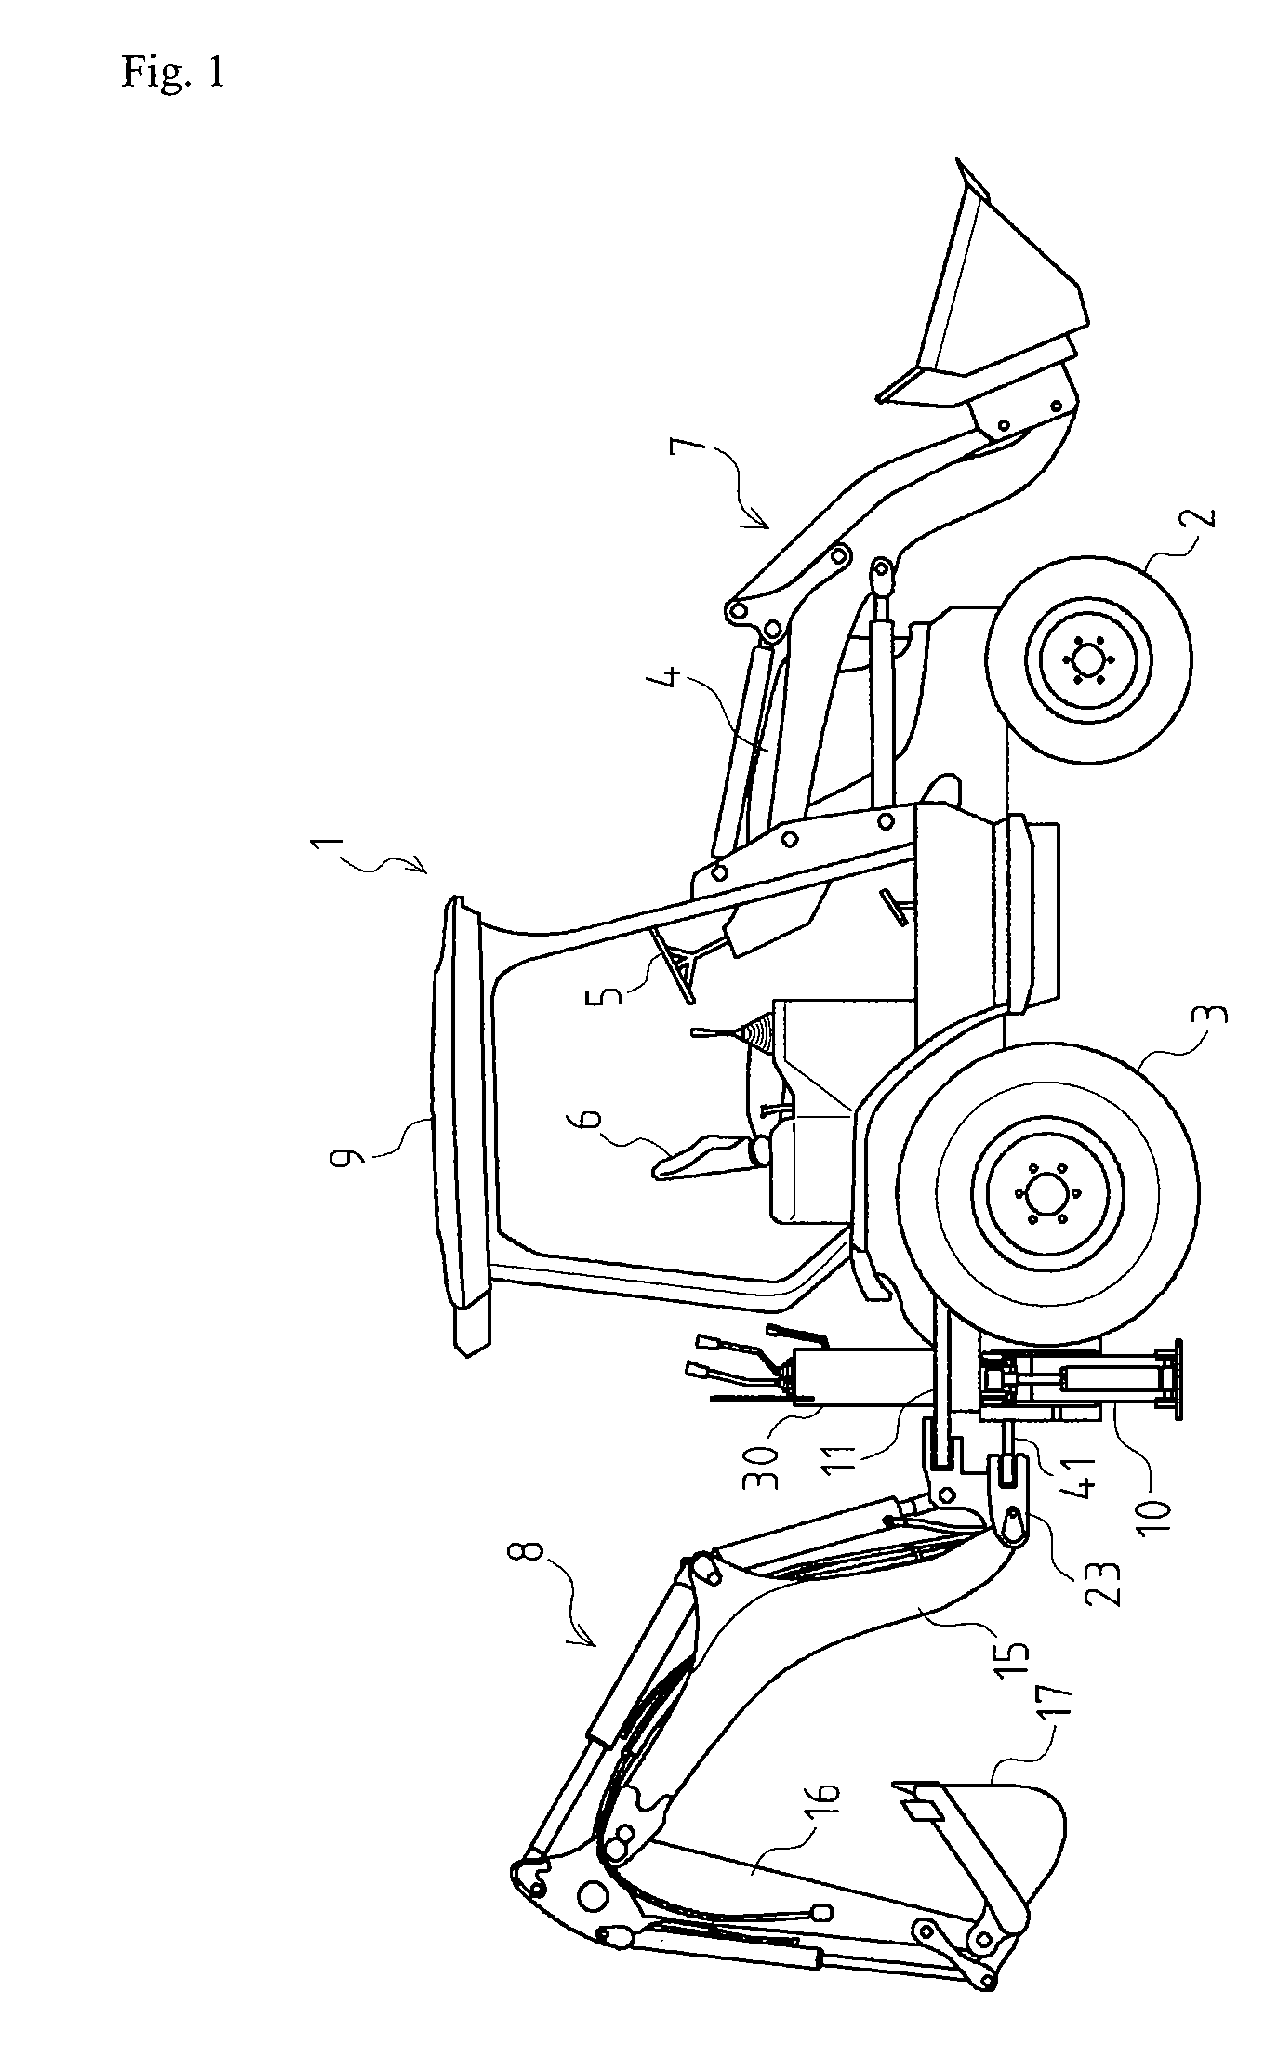 Hydraulic Cylinder of Outrigger